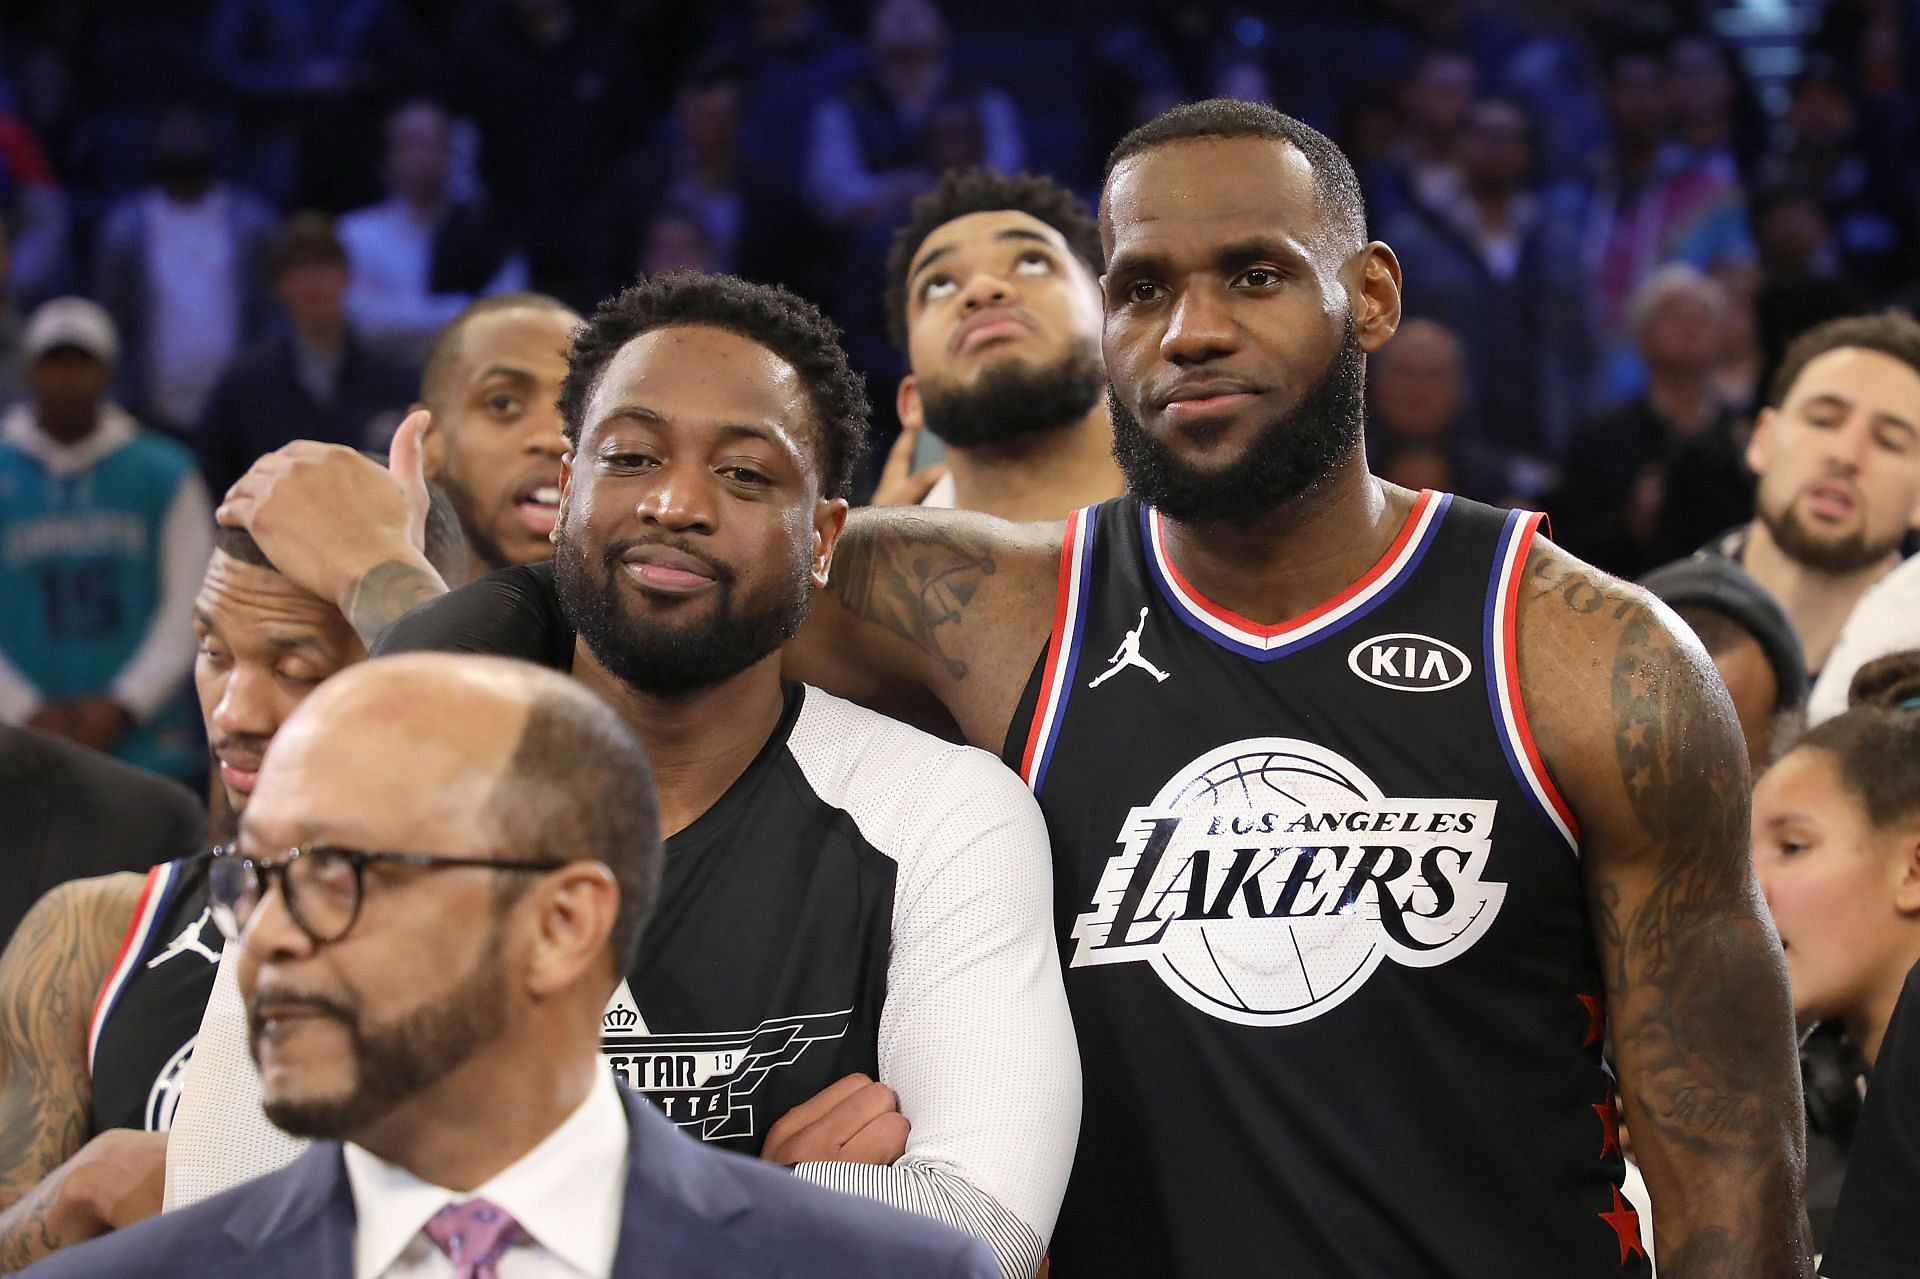 LeBron James and Dwyane Wade at the 2019 NBA All-Star Game